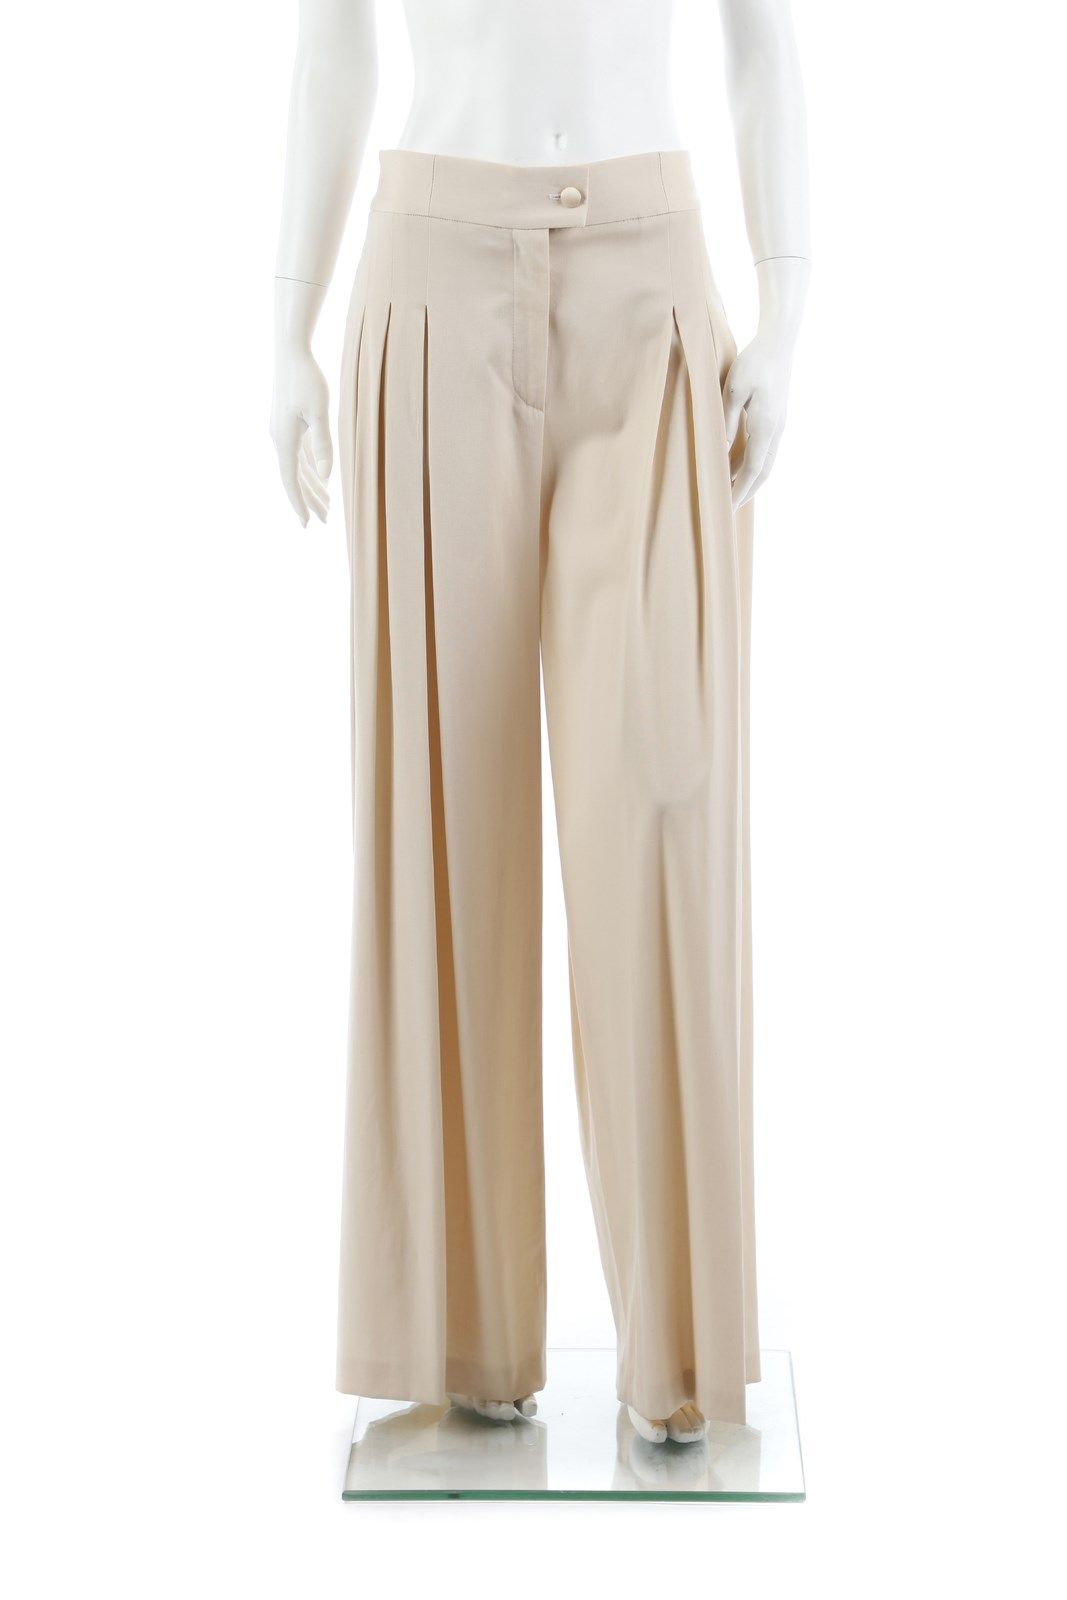 ANTONIO MARRAS White pleated palazzo trousers. Size 46IT. Made in Italy. Pantaló&hellip;